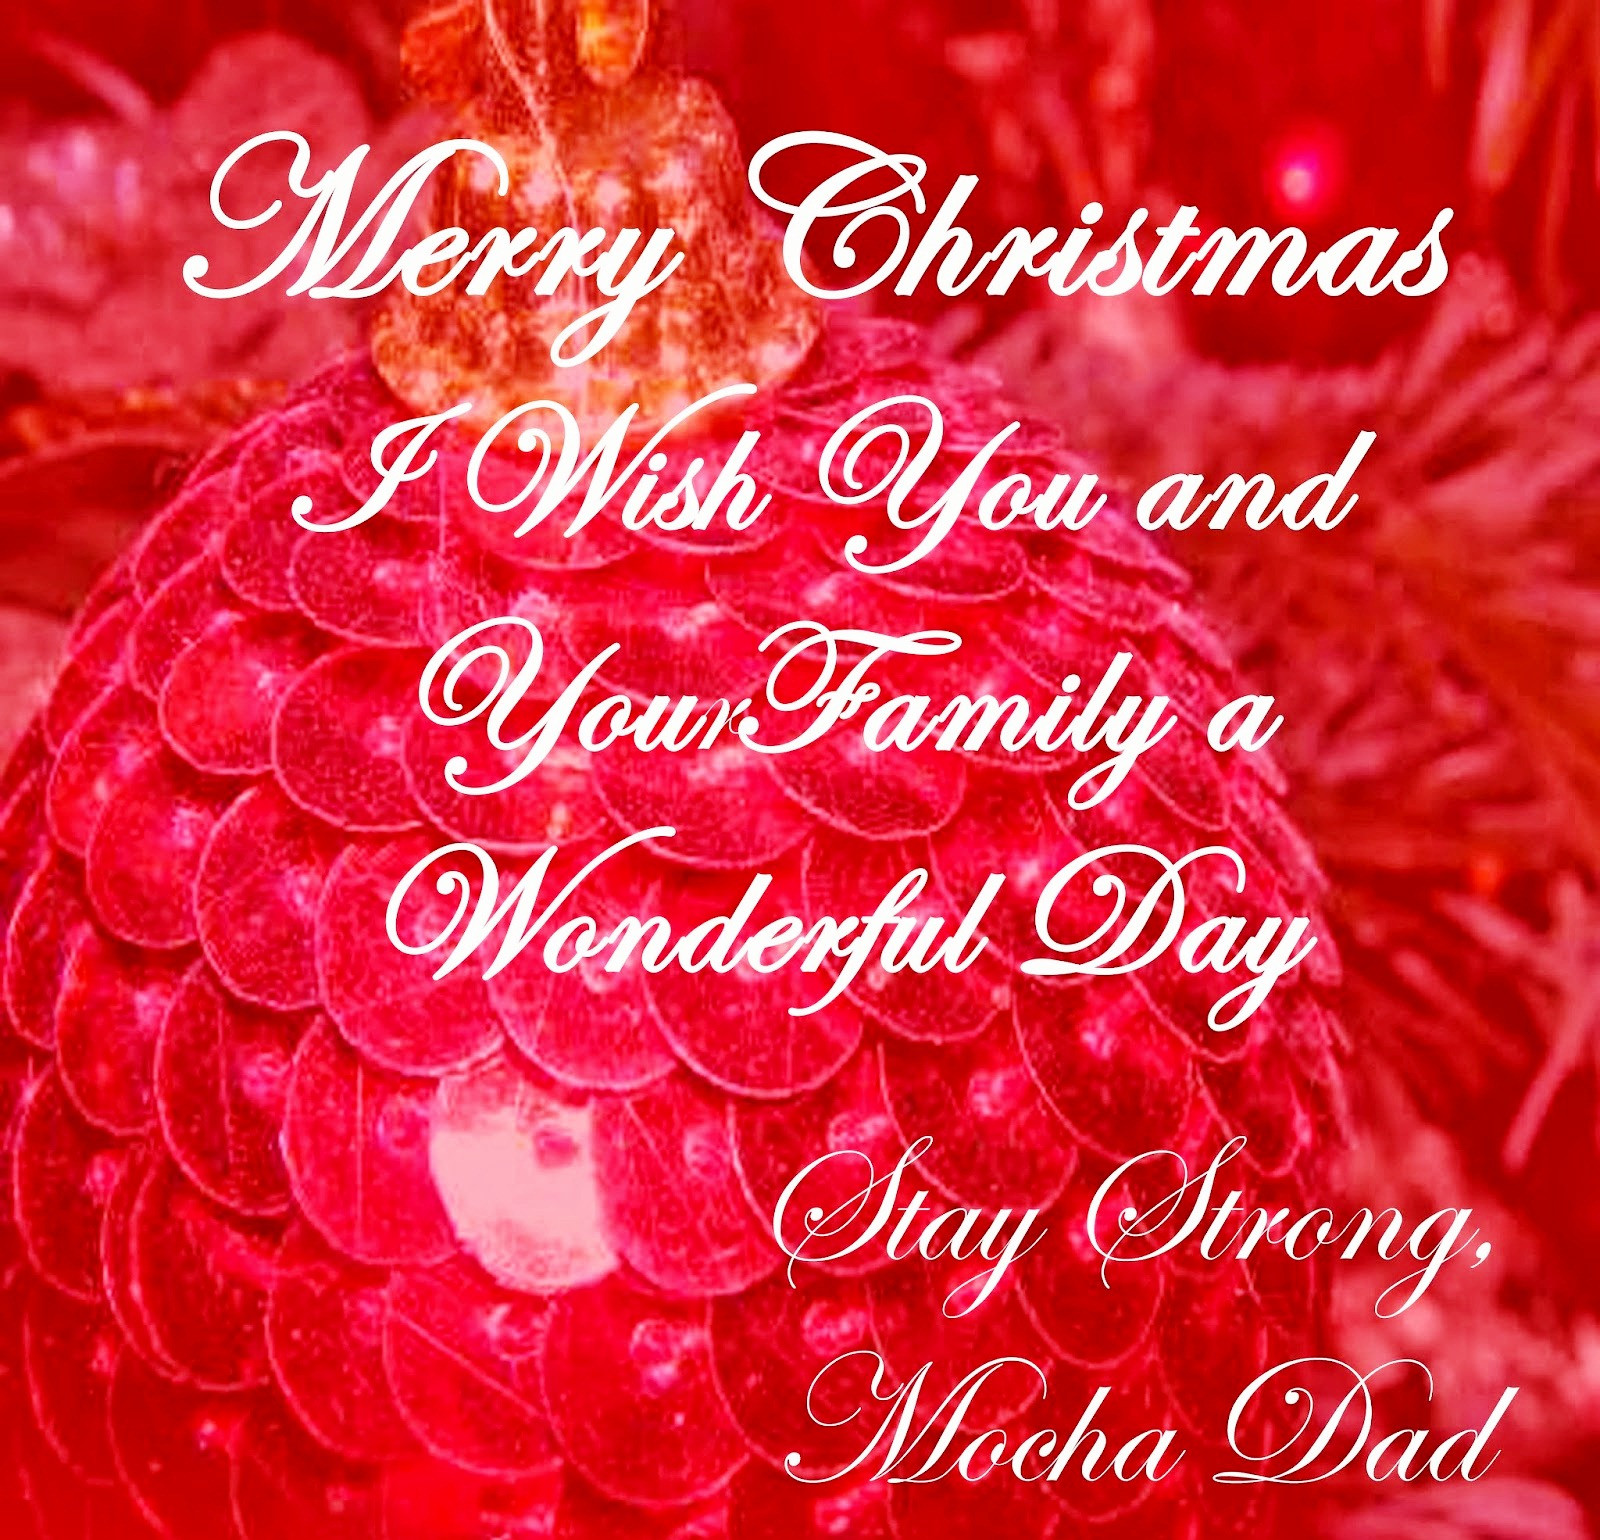 Christmas Pic Quotes
 20 Merry Christmas Quotes 2014